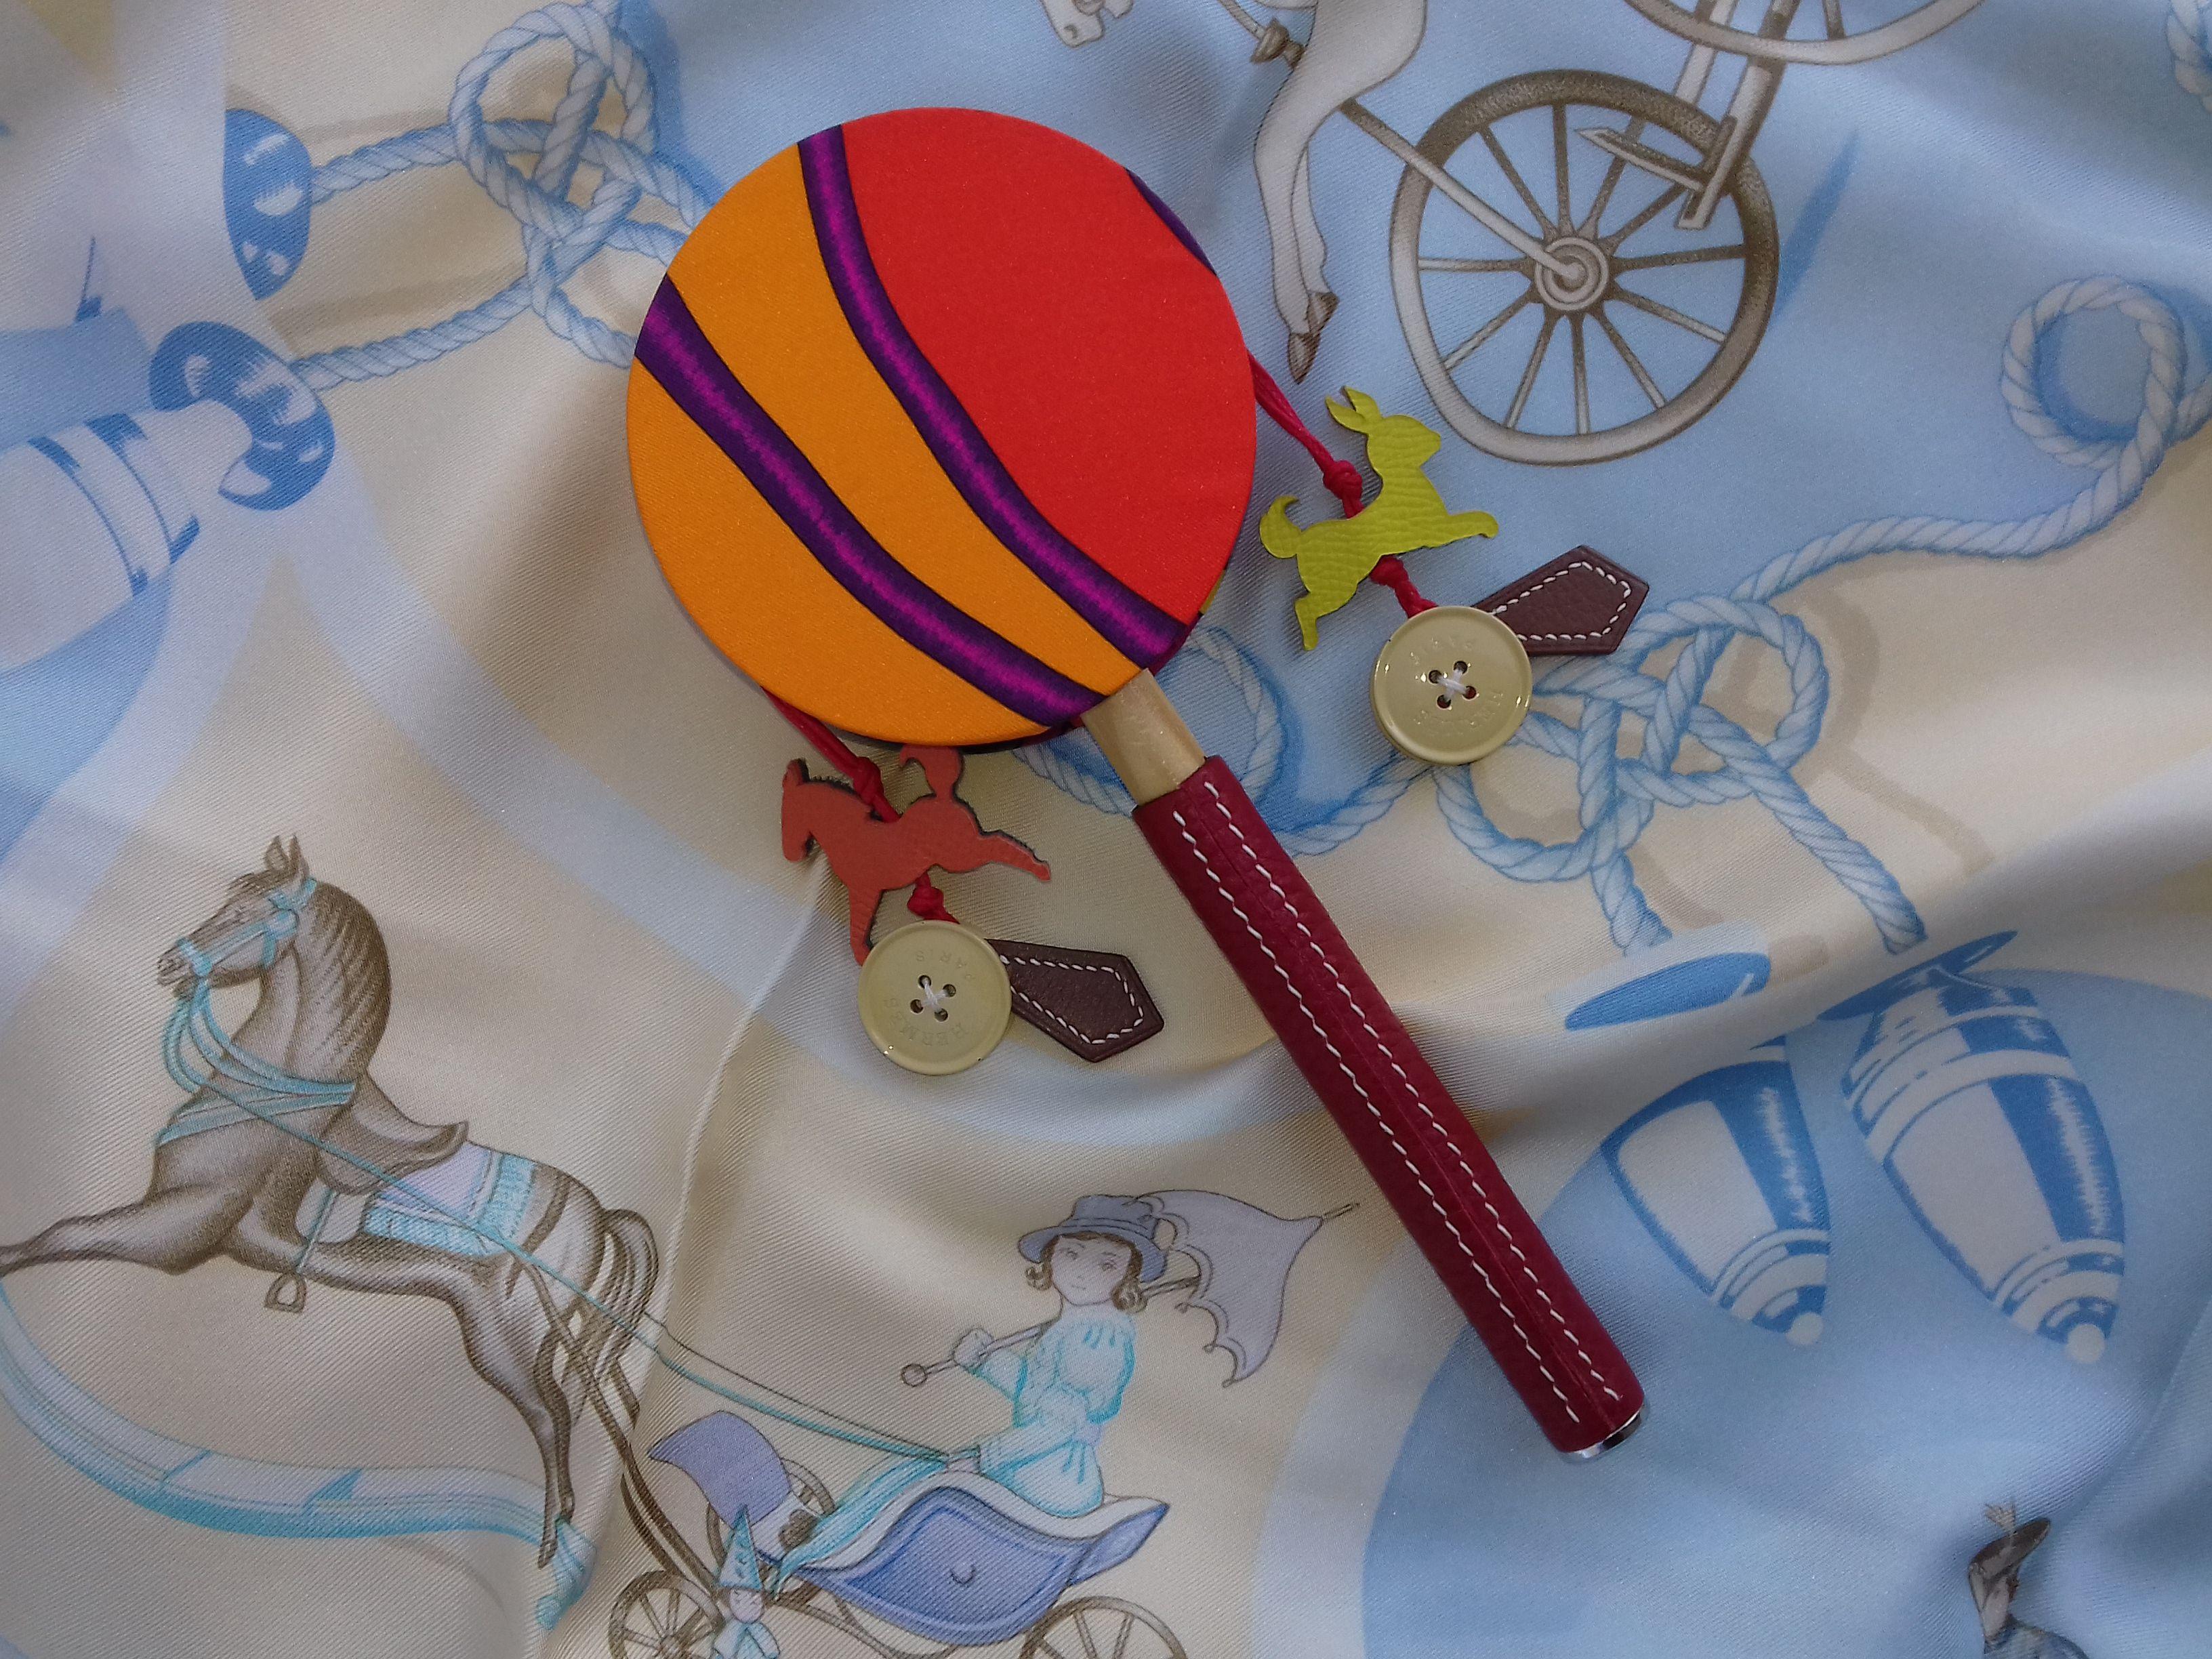 Authentic Hermès Tambourine

Cutest rattle ever !

Made of Silk, Leather and Wood

Colorways: Mainly Orange and Pink

Made for the 2016 Hong Kong Mid Autumn Festival 

